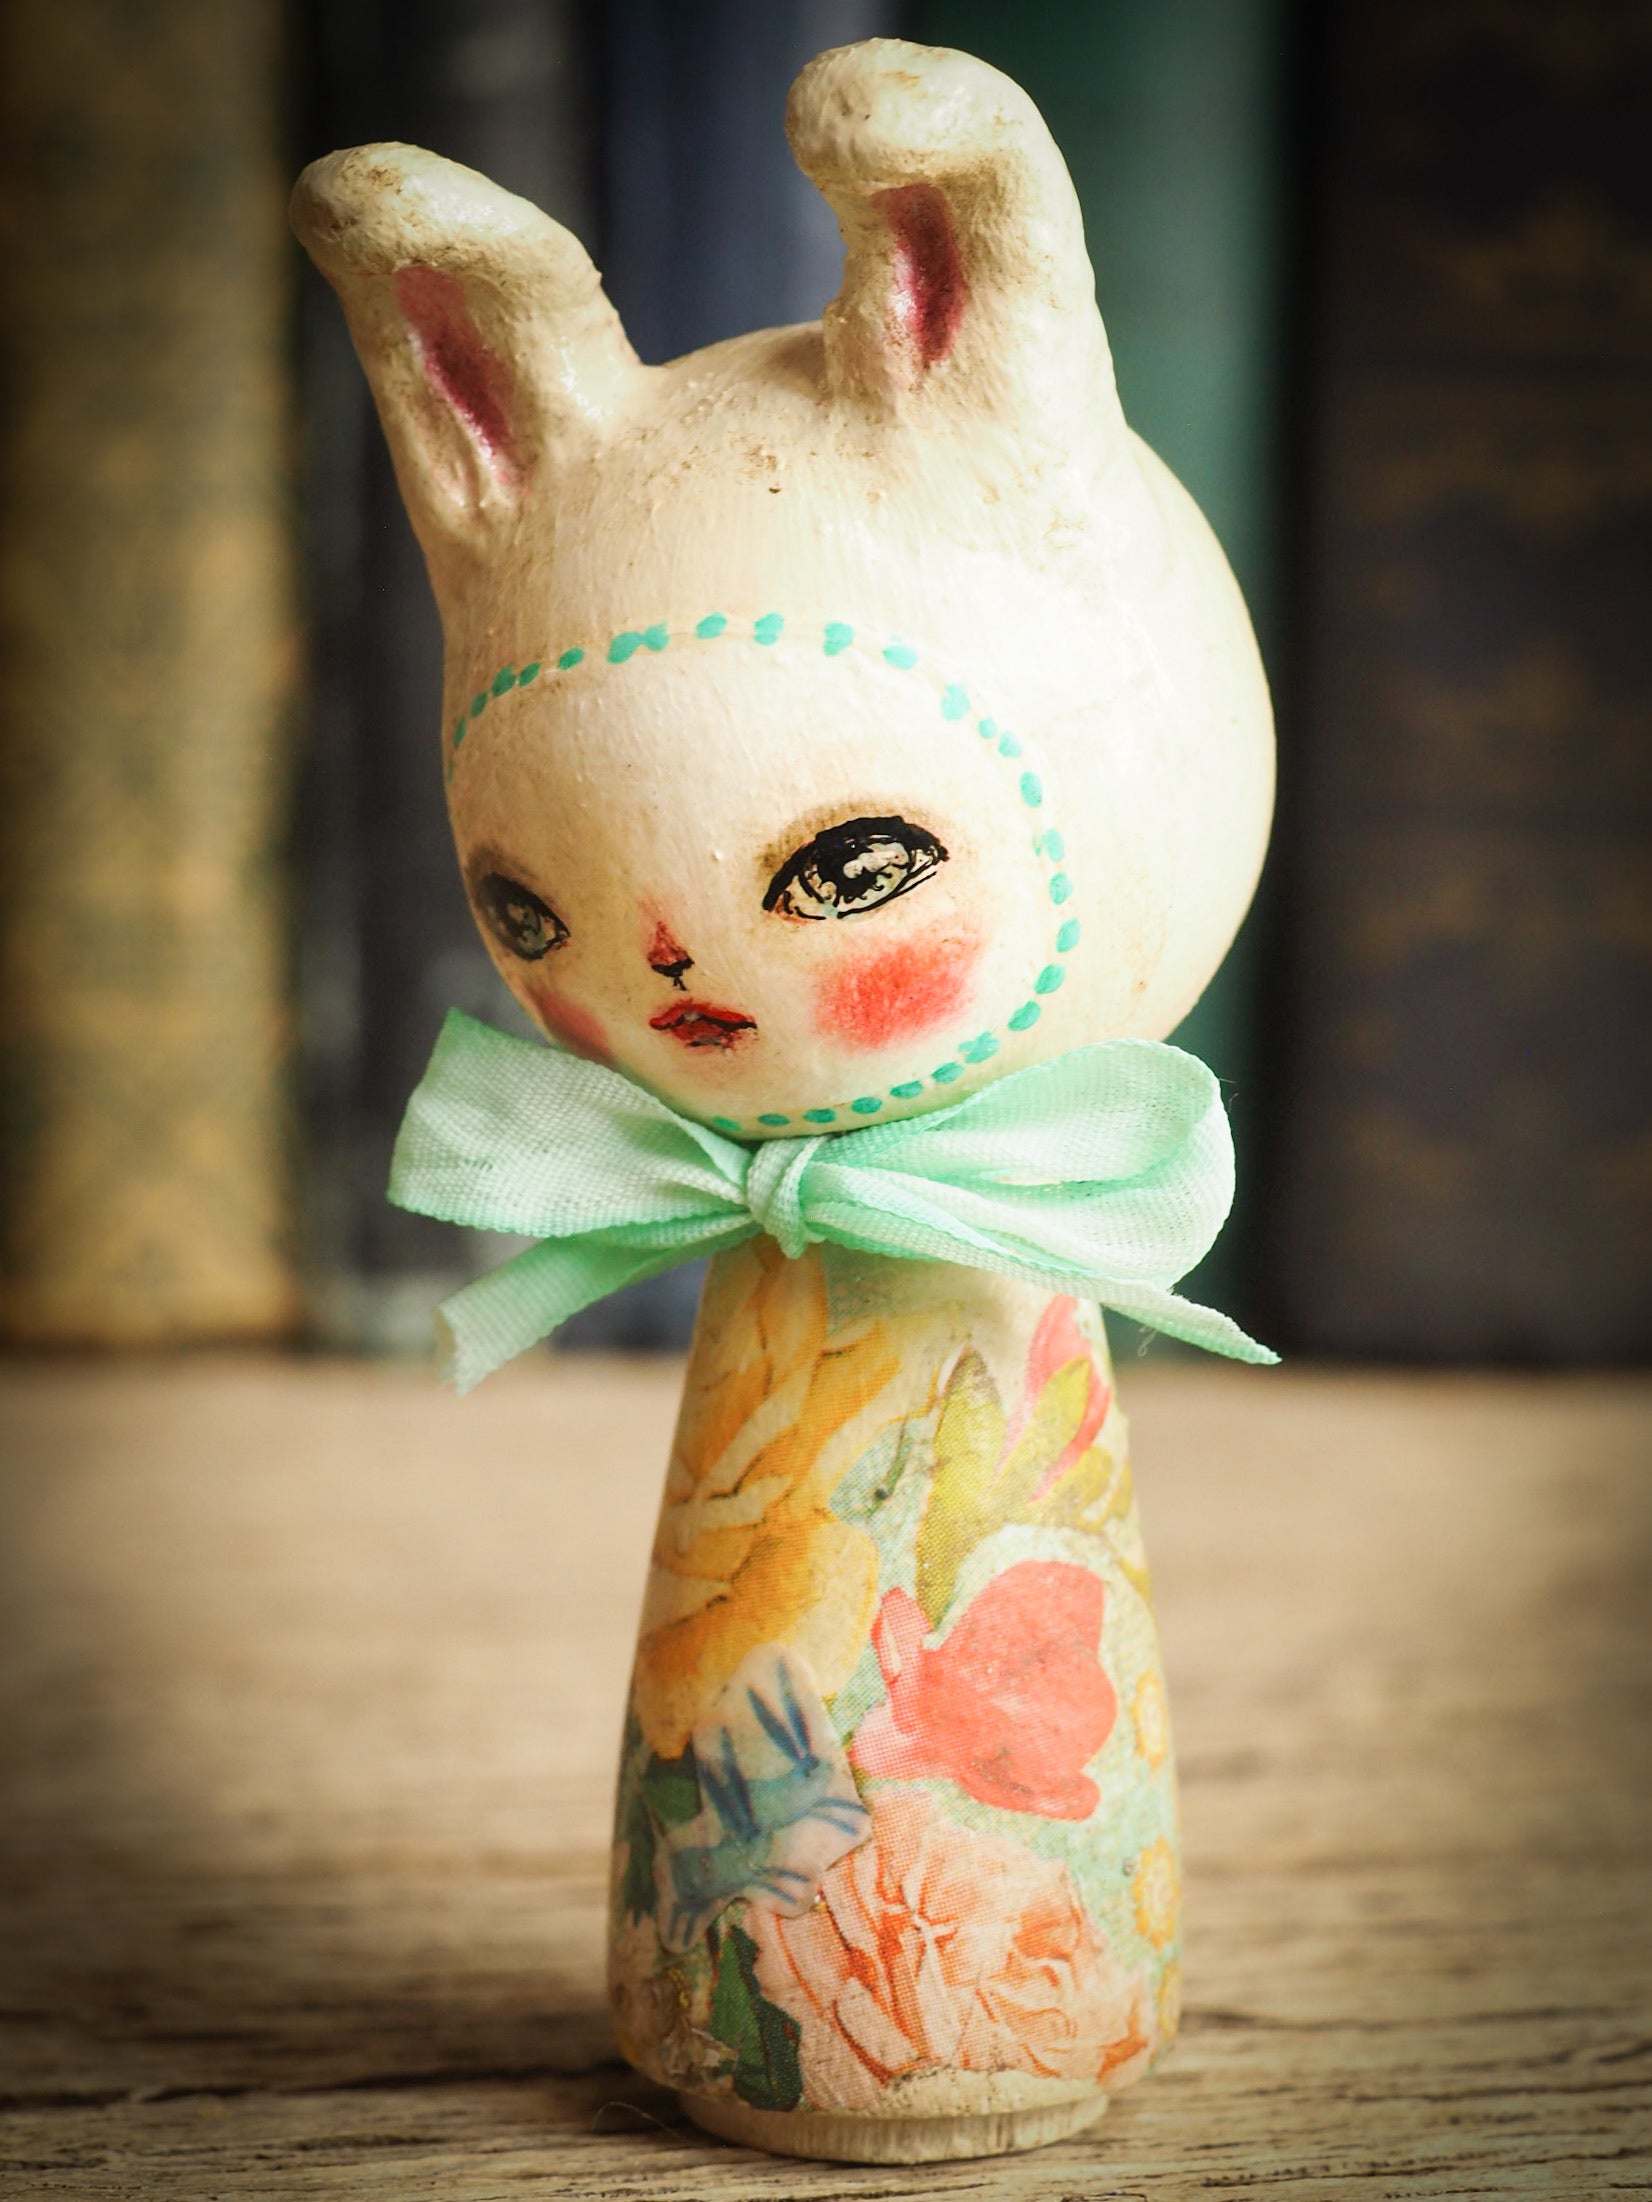 Adorable Easter Bunny Rabbit handmade kokesi wooden mini art doll by Danita Art craft project made with modeling clay silk ribbon and decoupage applications